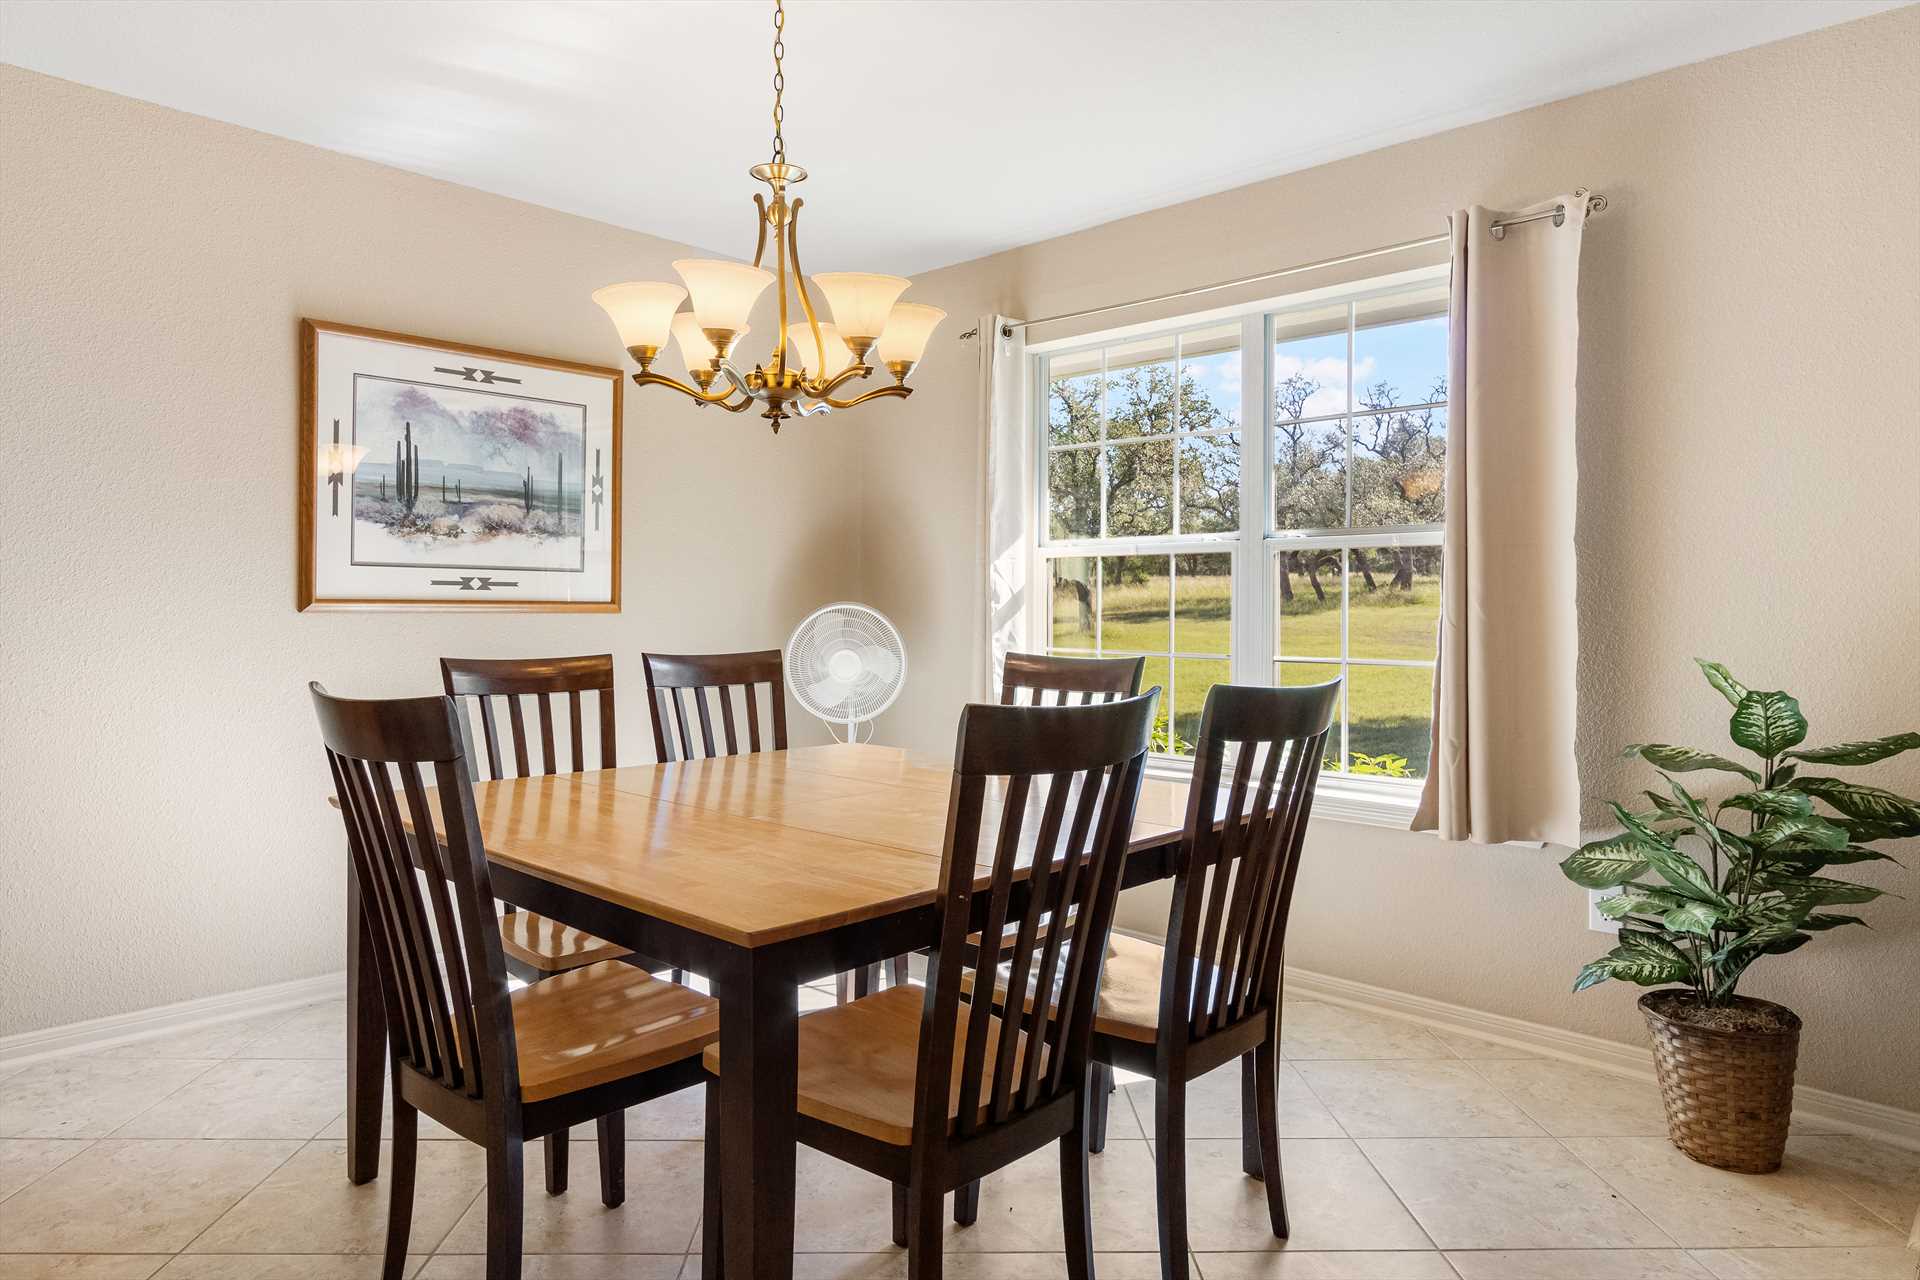                                                 With two dining tables and bar-style seating surrounding the kitchen, there's all kinds of seating options during food prep and when your crew sits down to eat!